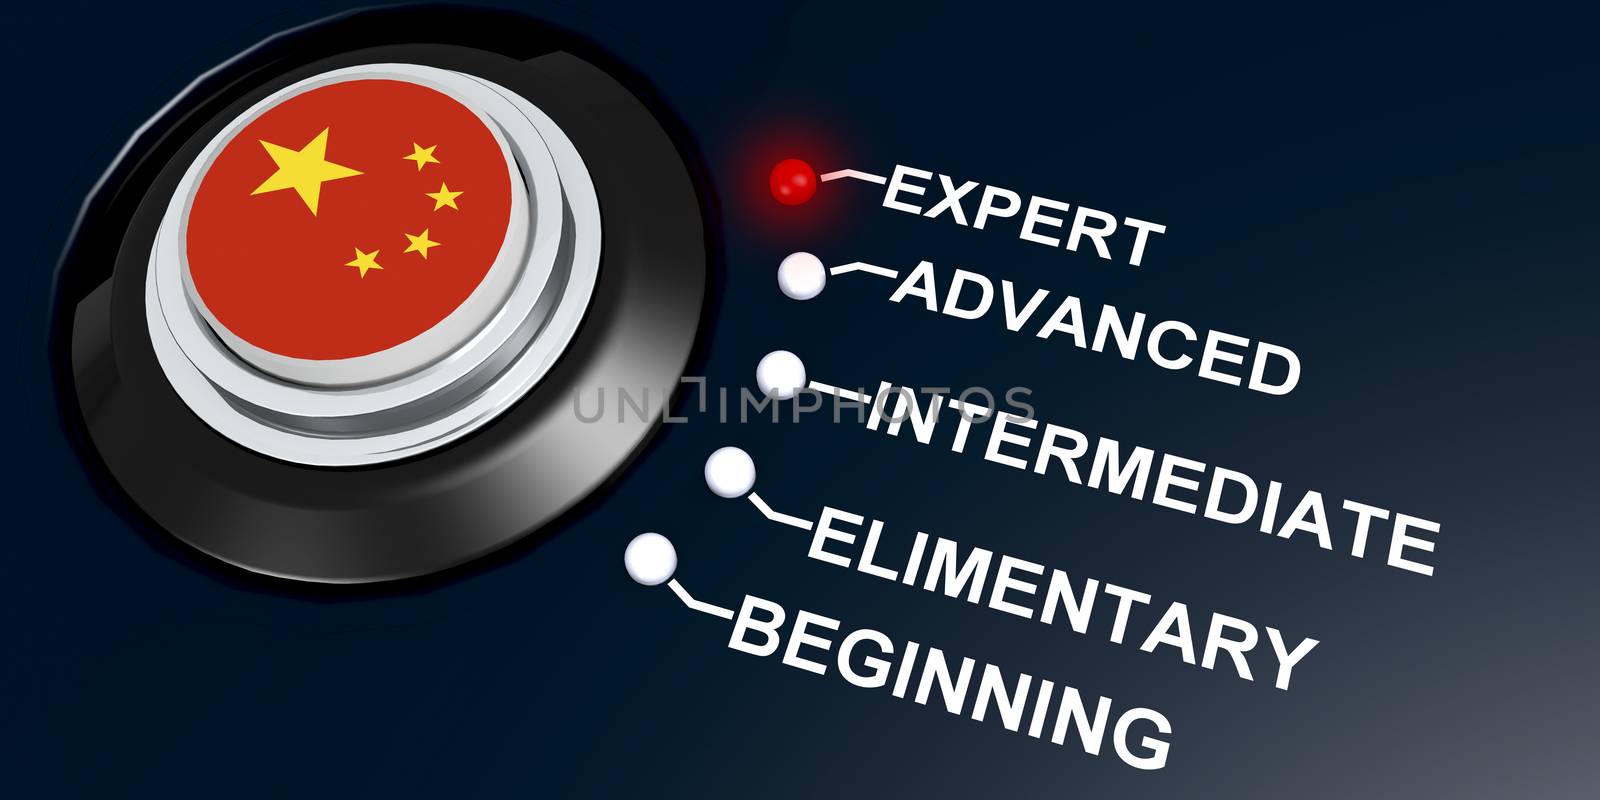 Switch knob button with Chinal flag and Chinese language levels of expert, 3d rendering